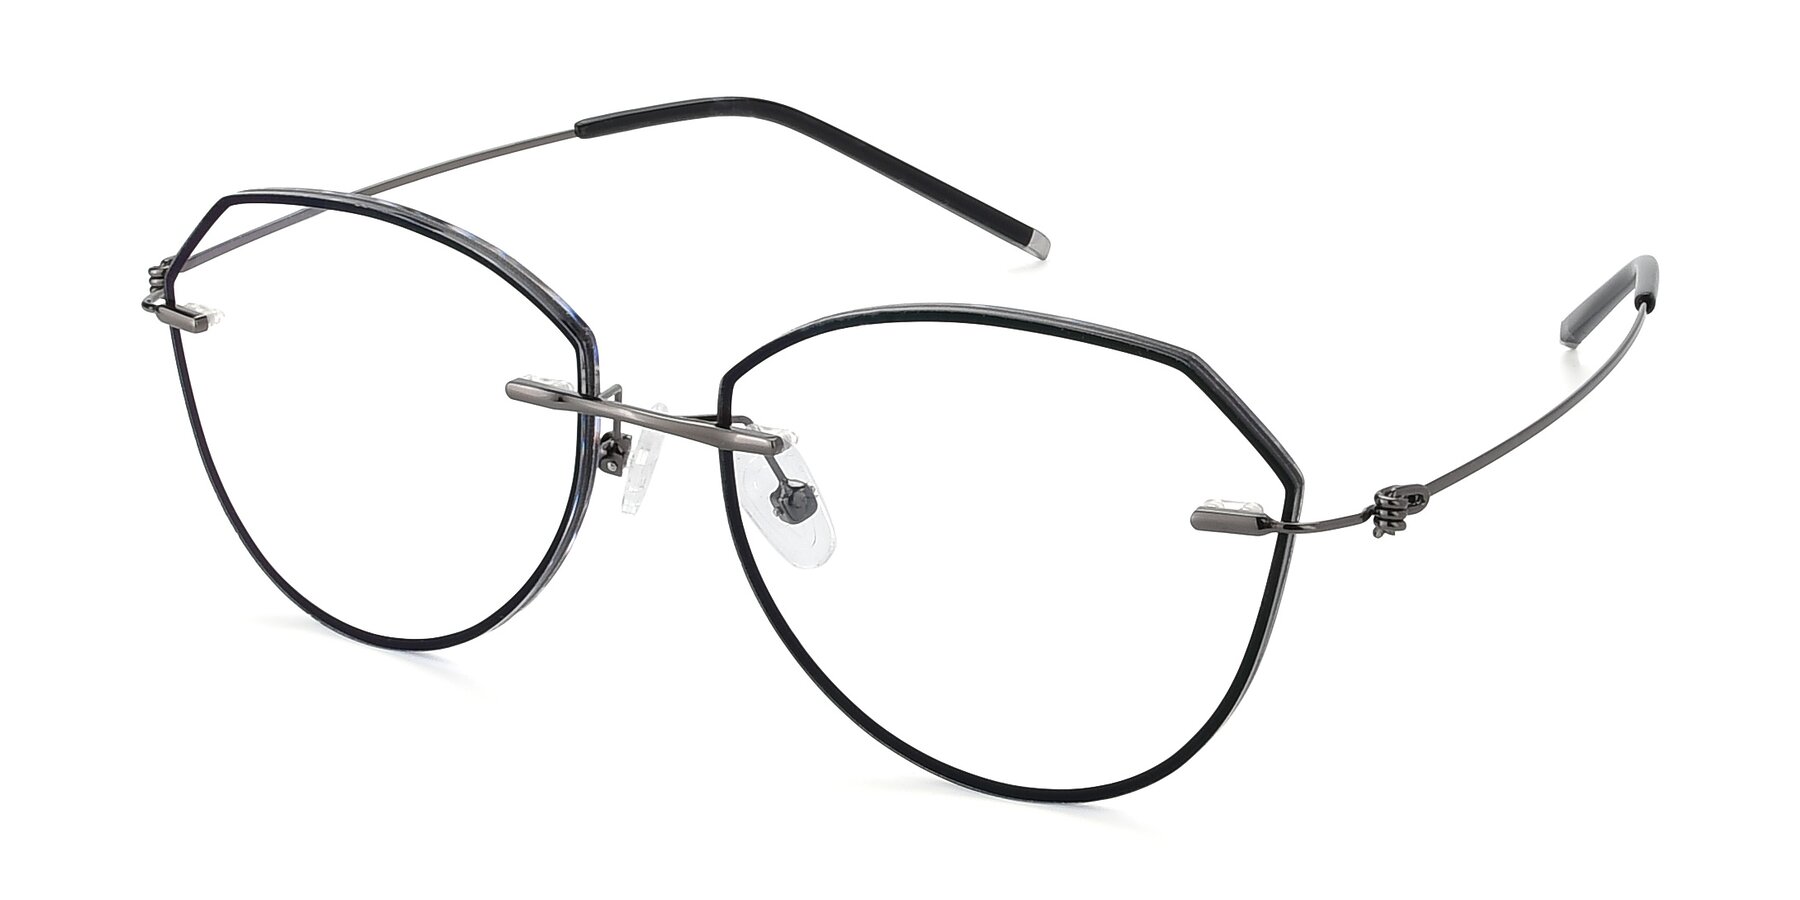 Angle of Y7005 in Black-Gunmetal with Clear Blue Light Blocking Lenses